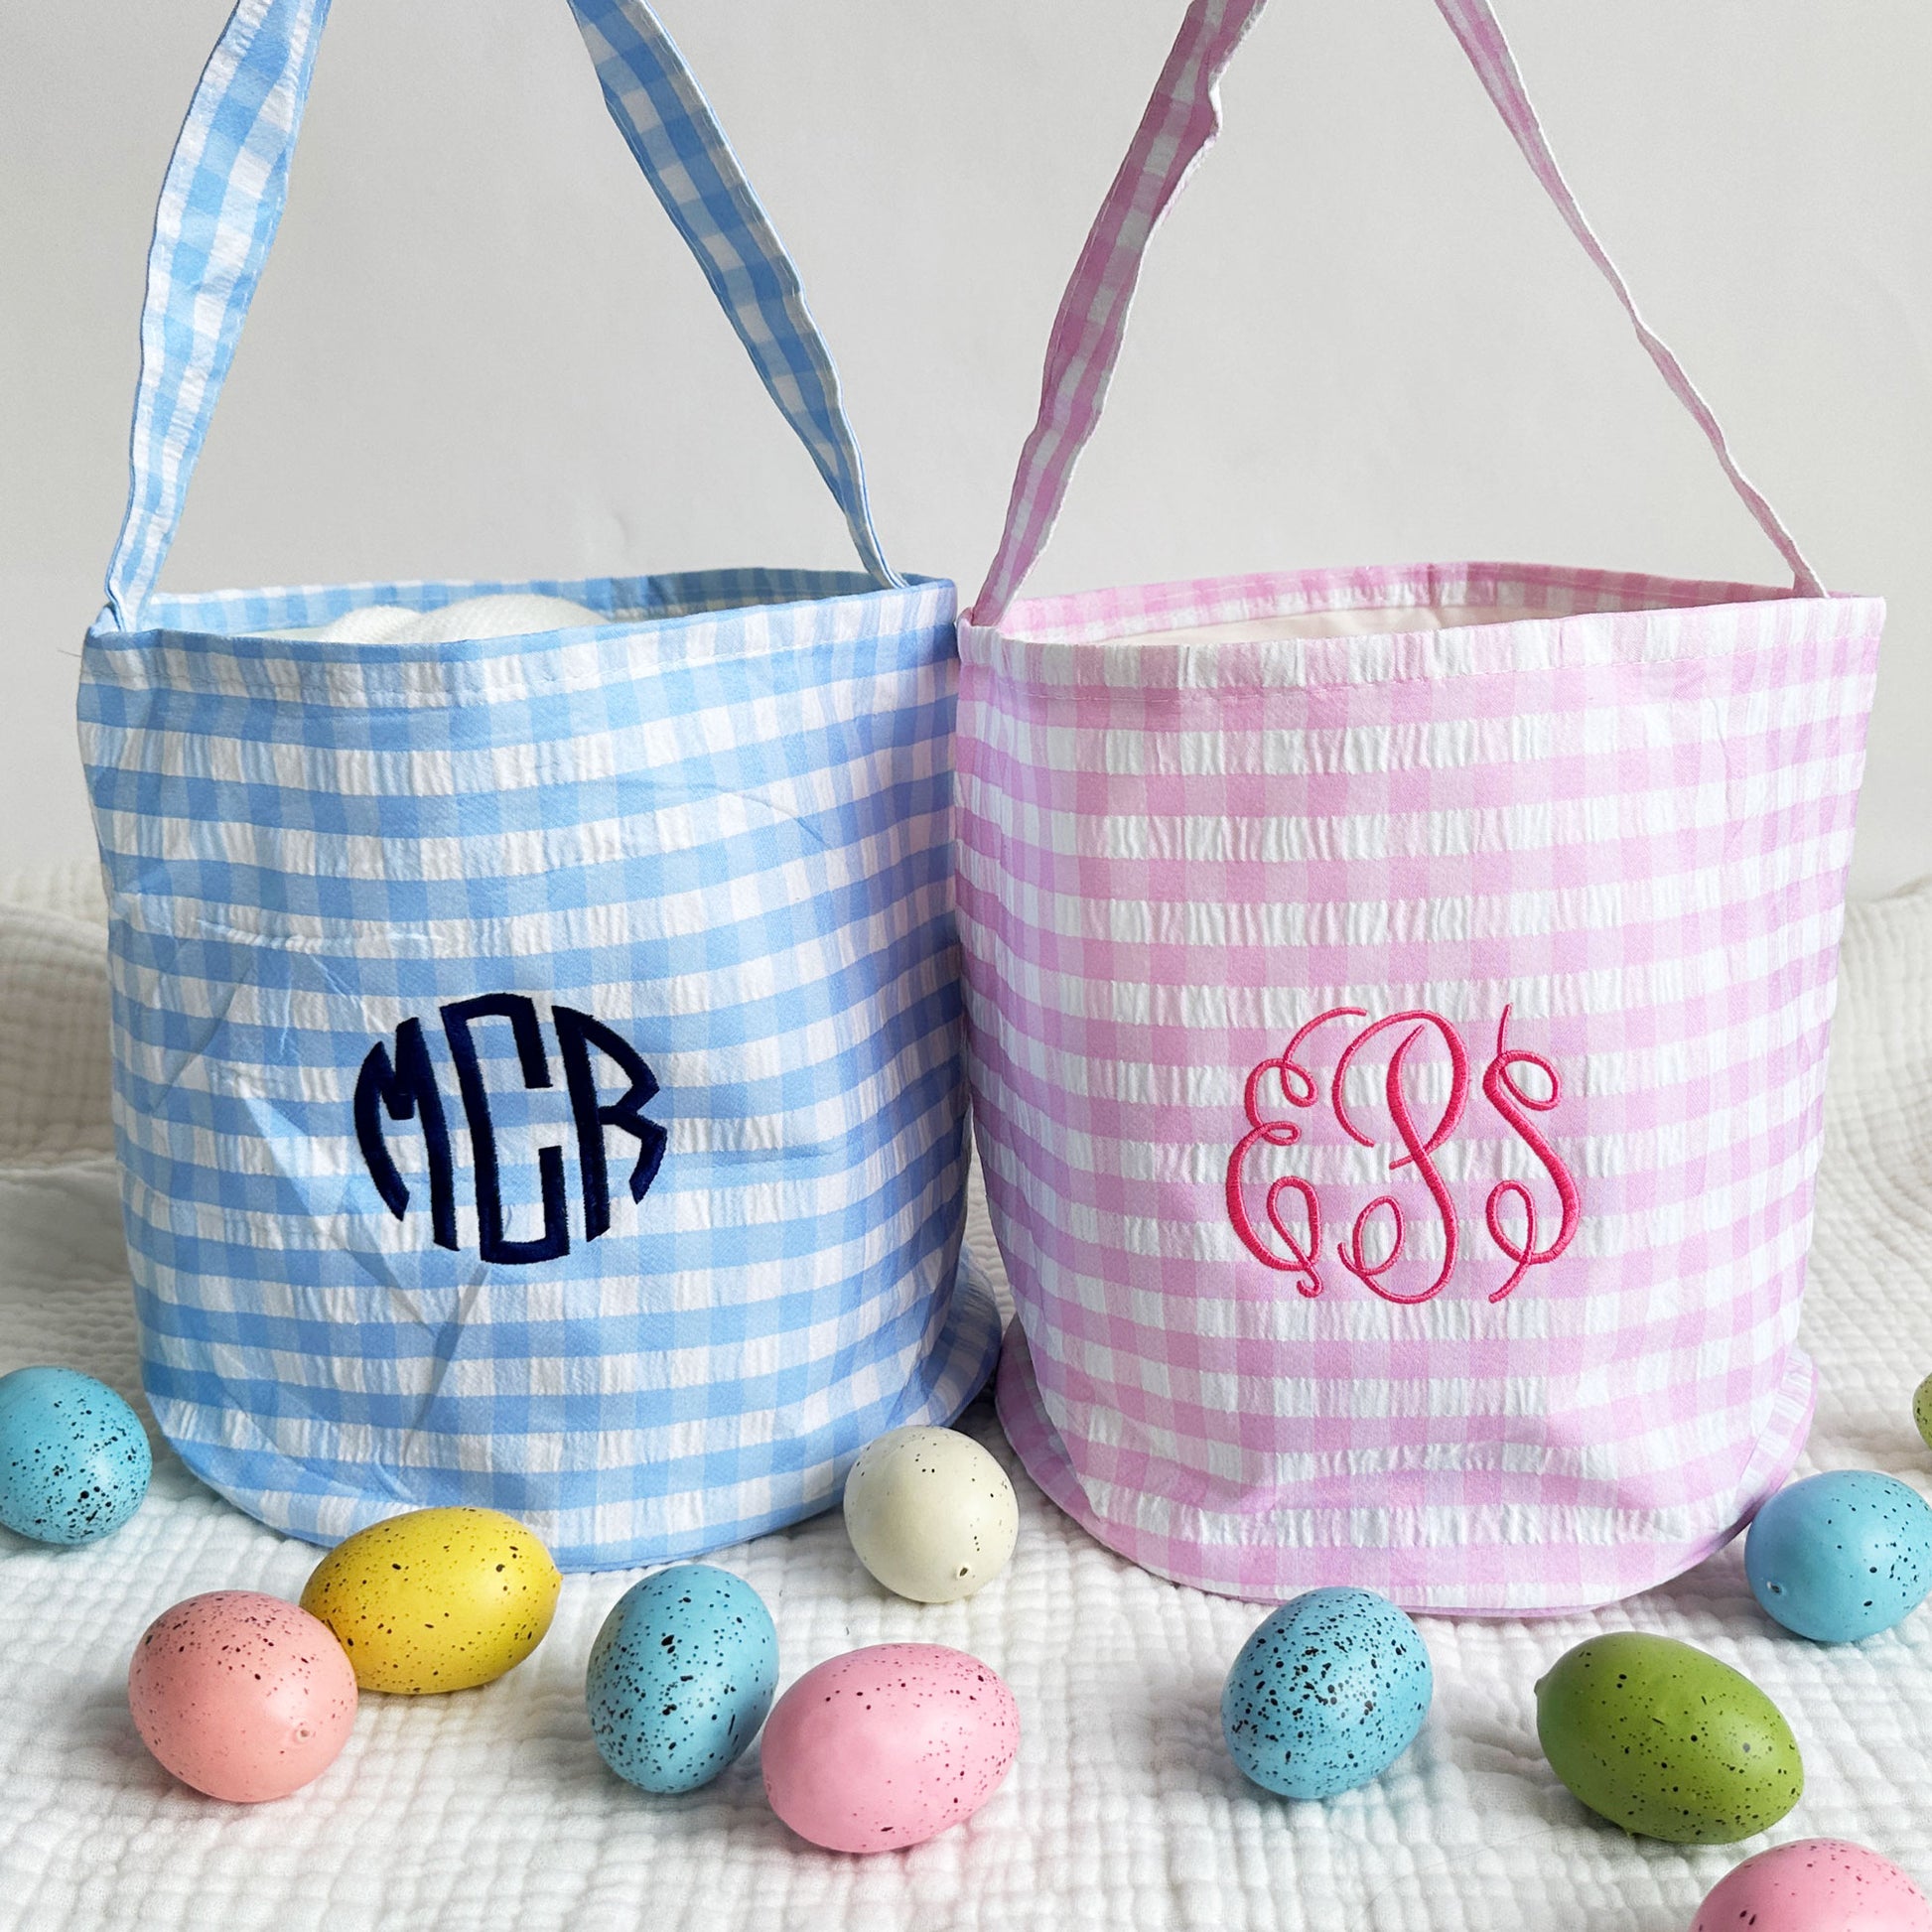 Blue and pink gingham easter baskets with custom 3 letter monograms embroidered on the center